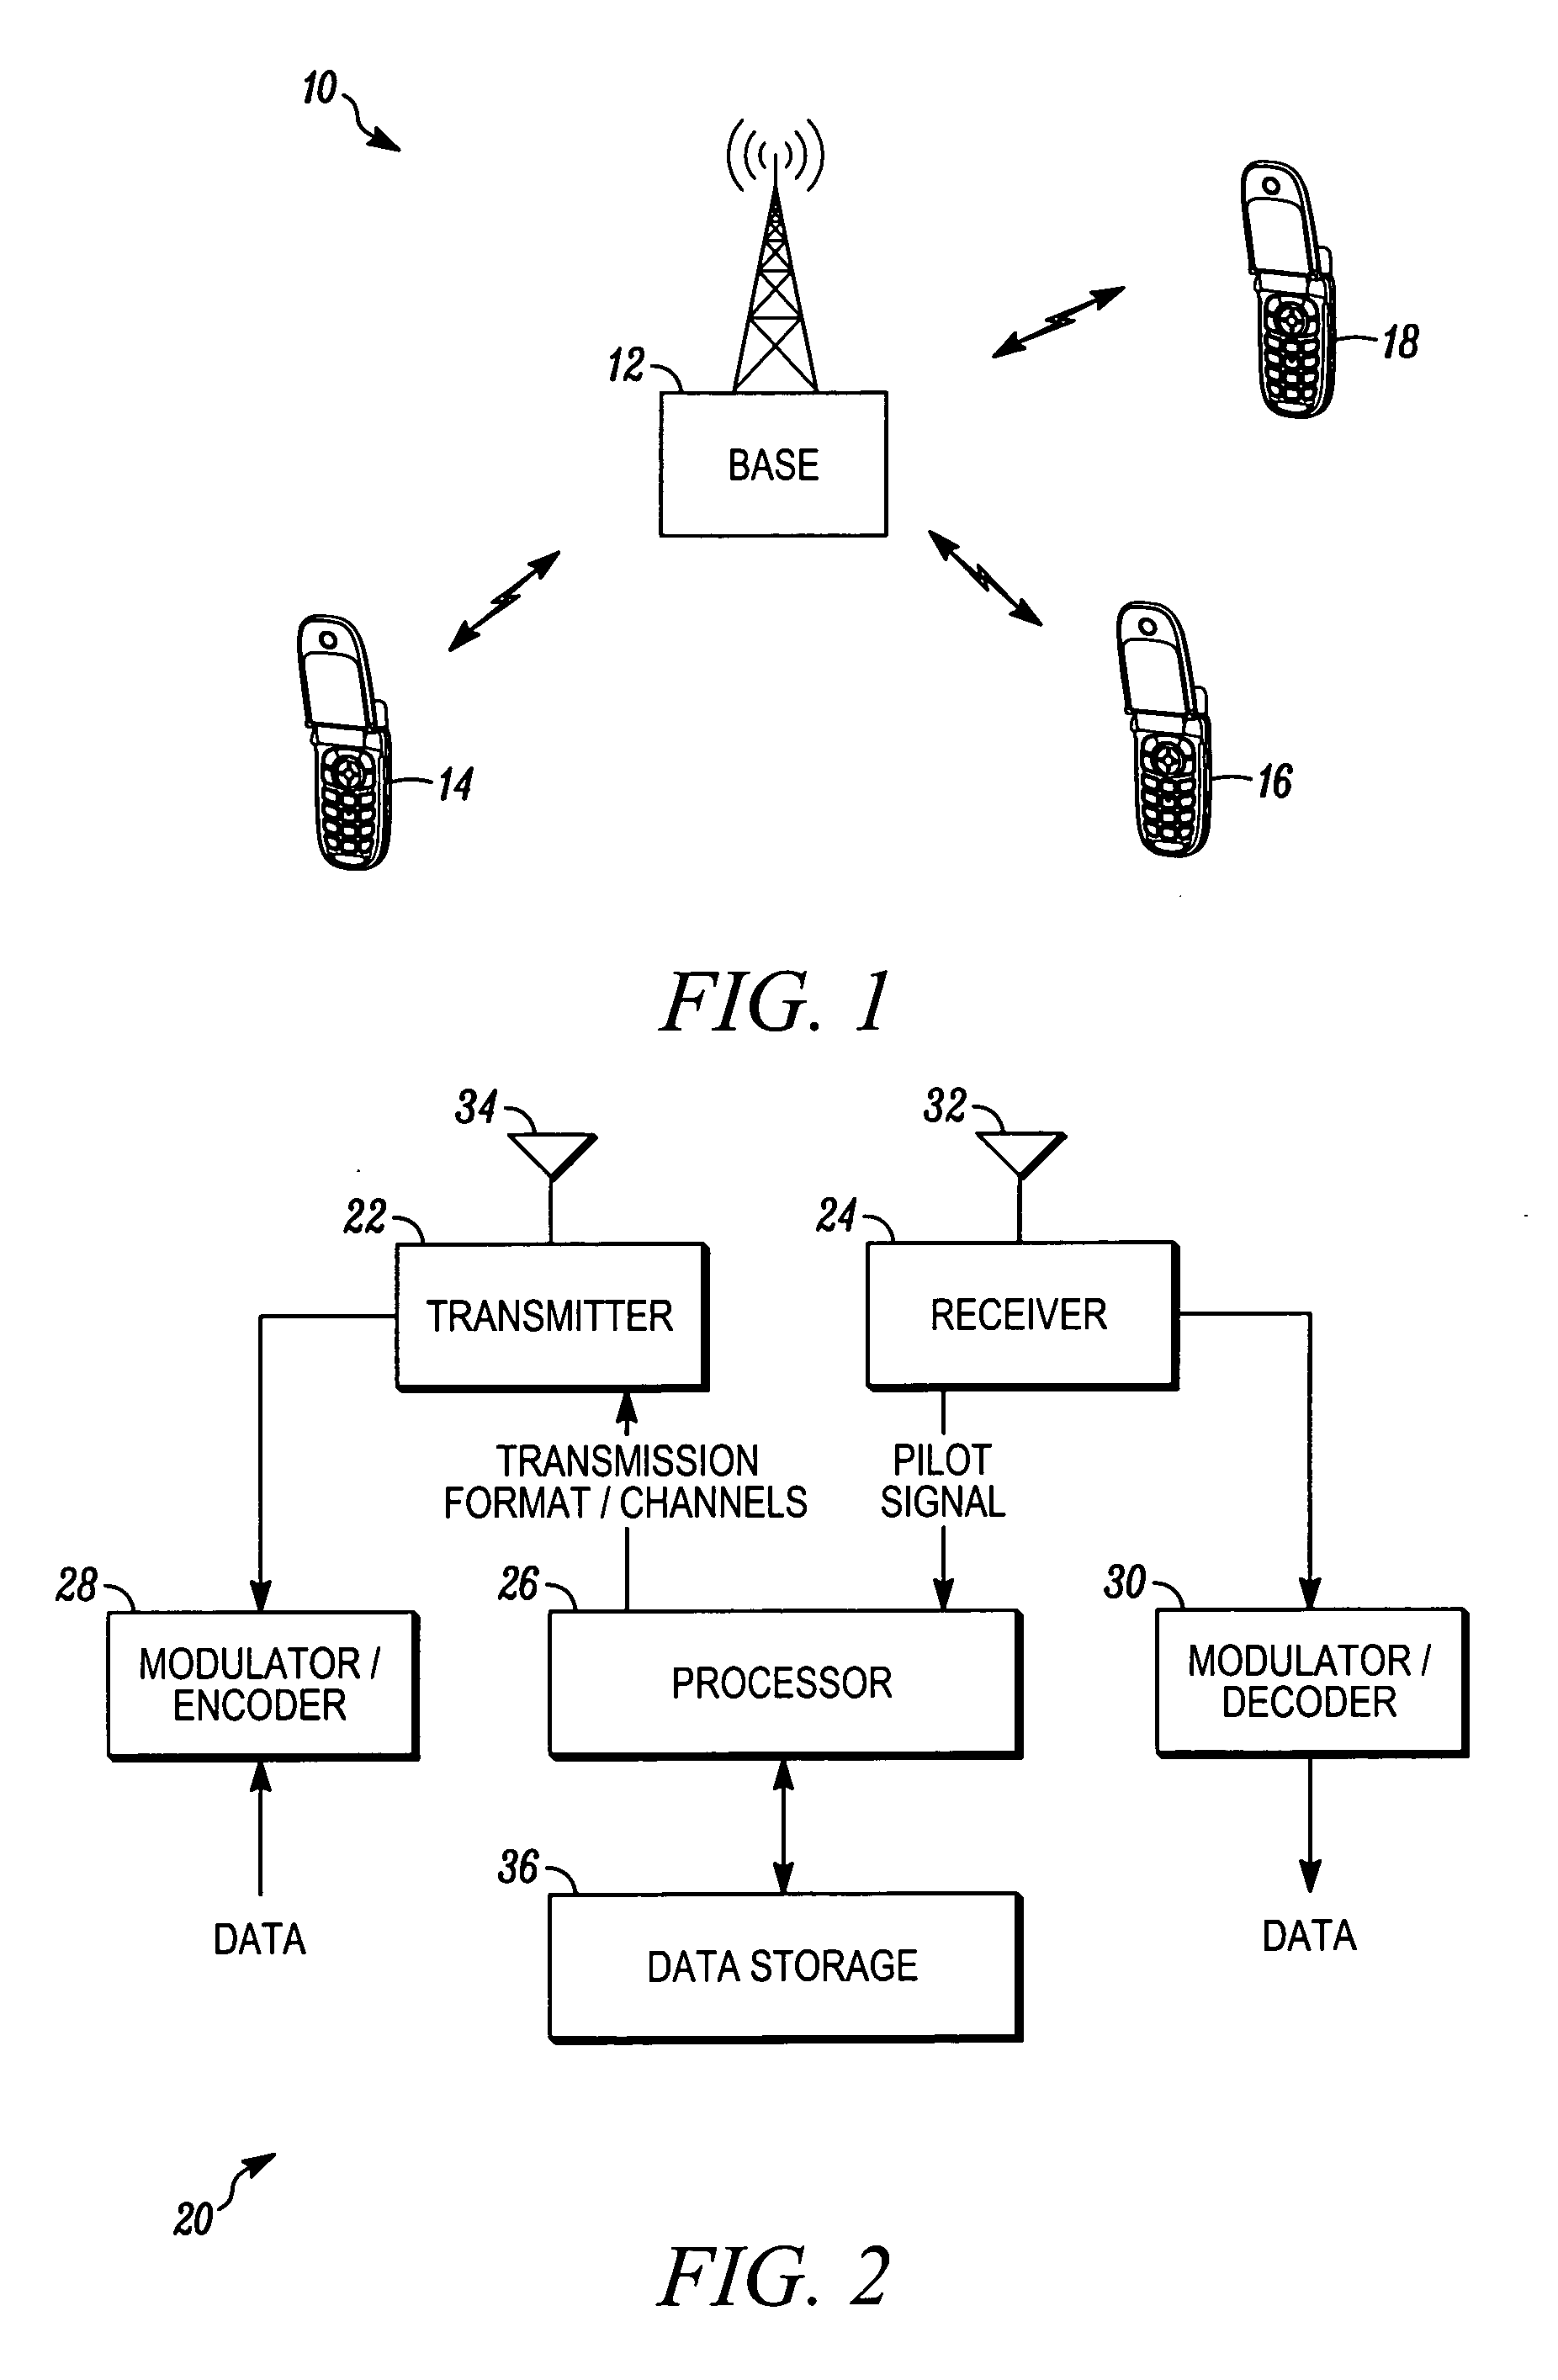 System and method for selecting transmission format using effective SNR